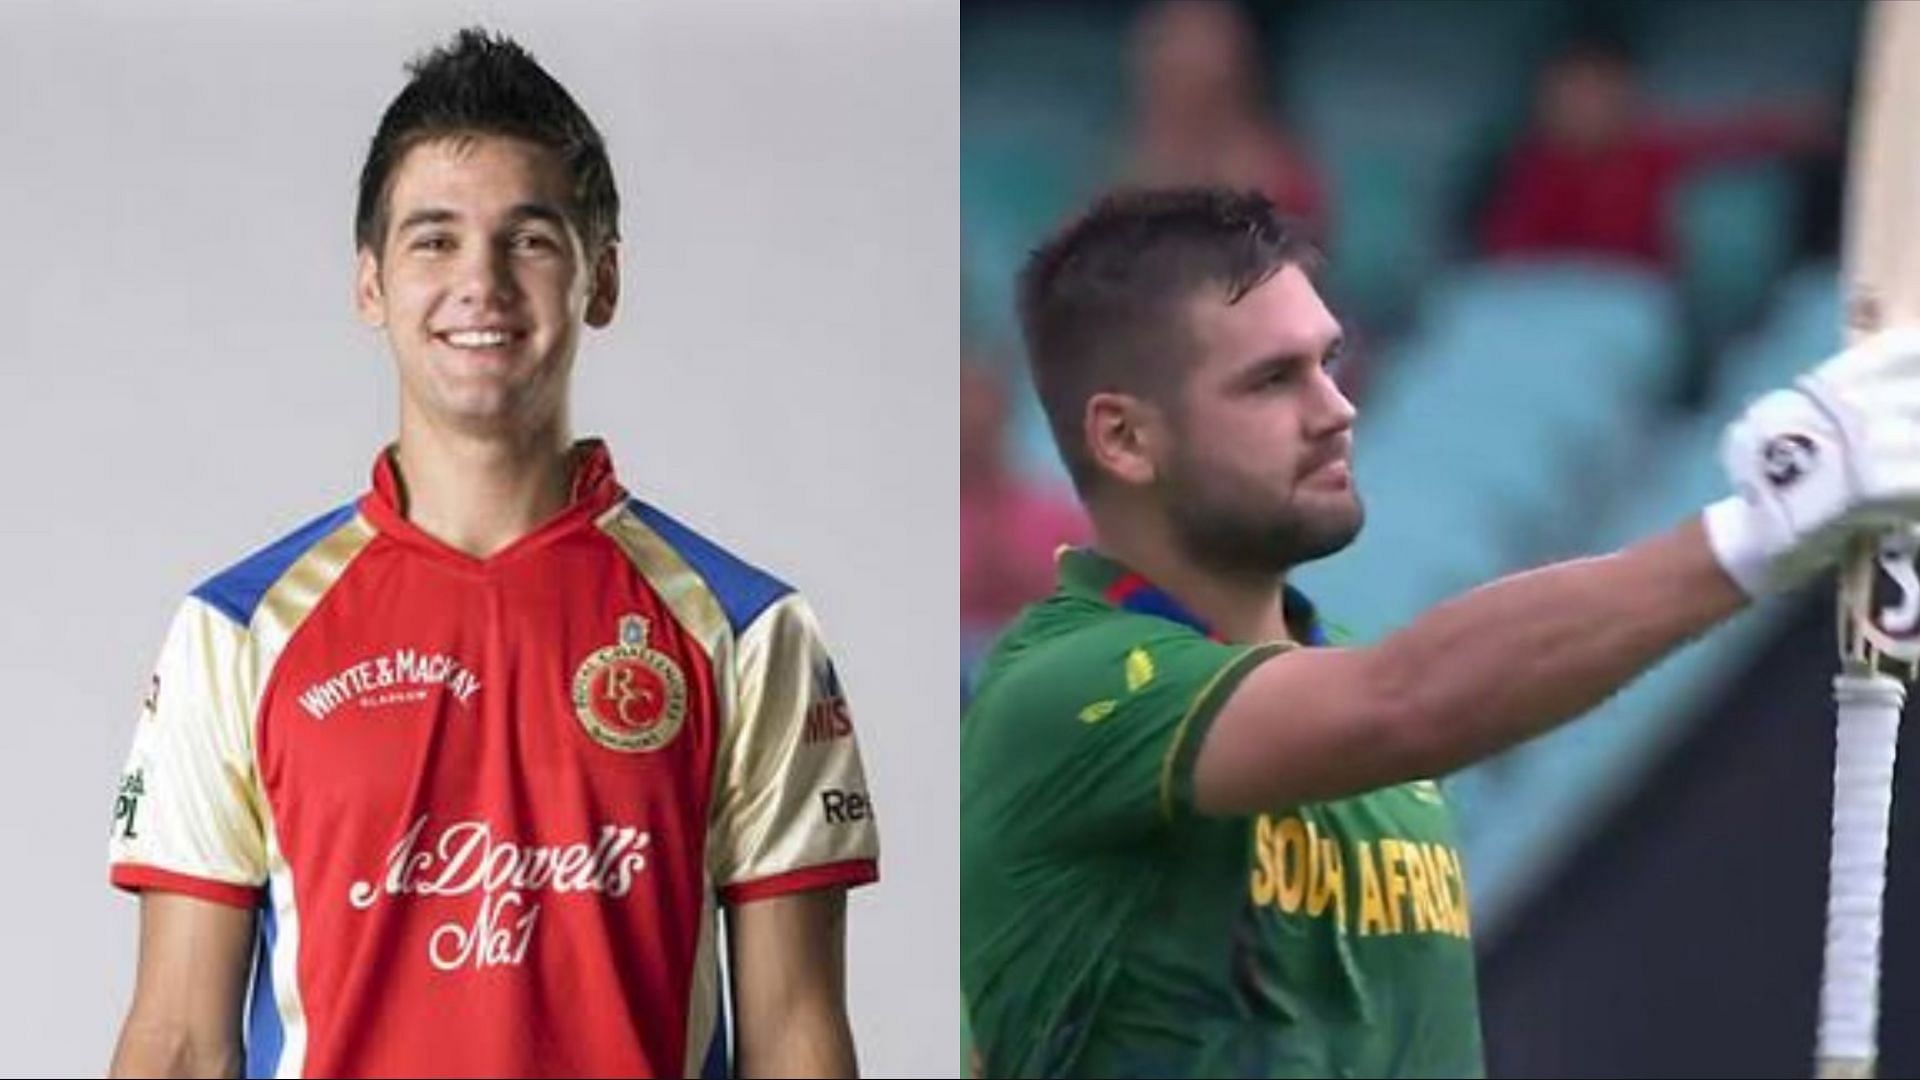 Rilee Rossouw once played for Royal Challengers Bangalore in IPL 